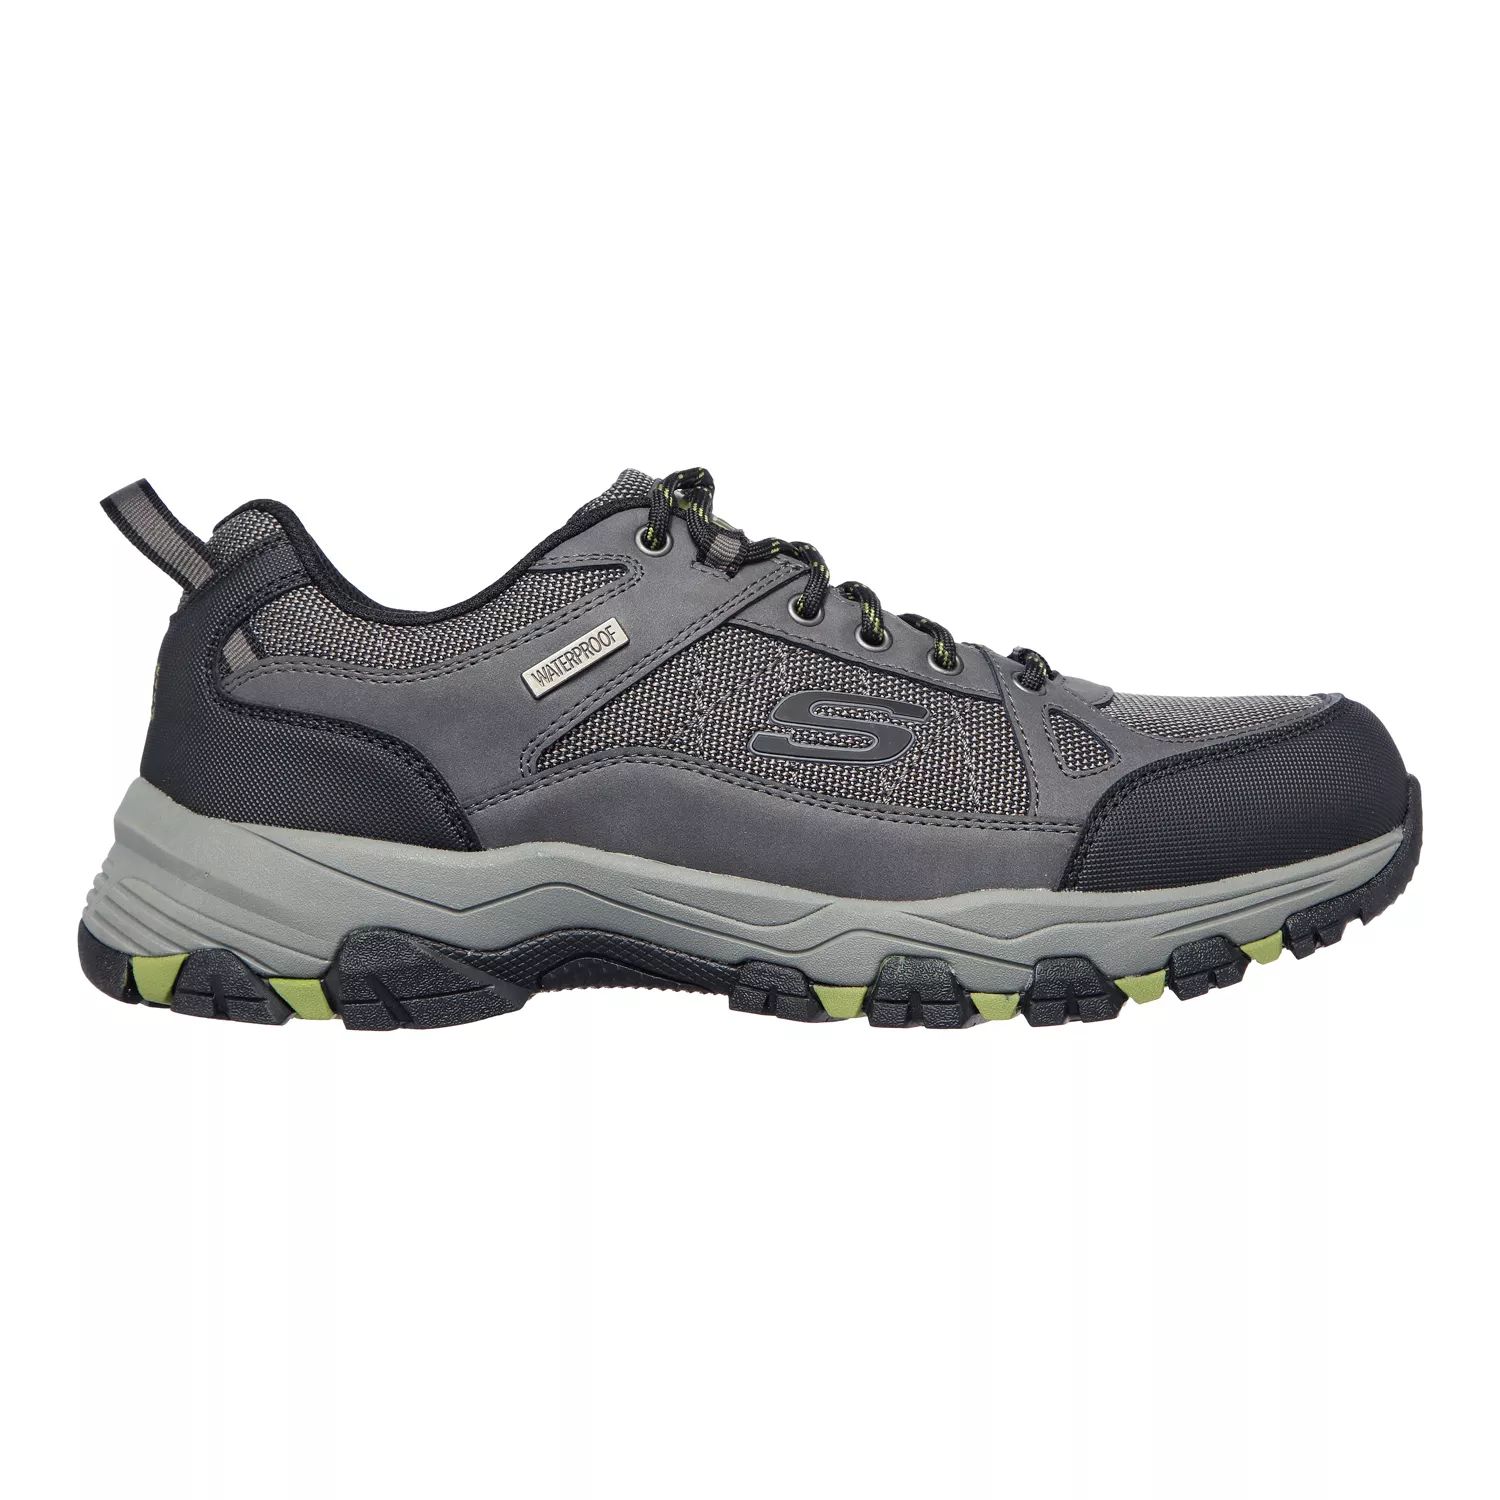 Мужские водонепроницаемые кроссовки Skechers Relaxed Fit Selmen Cormack кроссовки skechers selmen cormack dark taupe